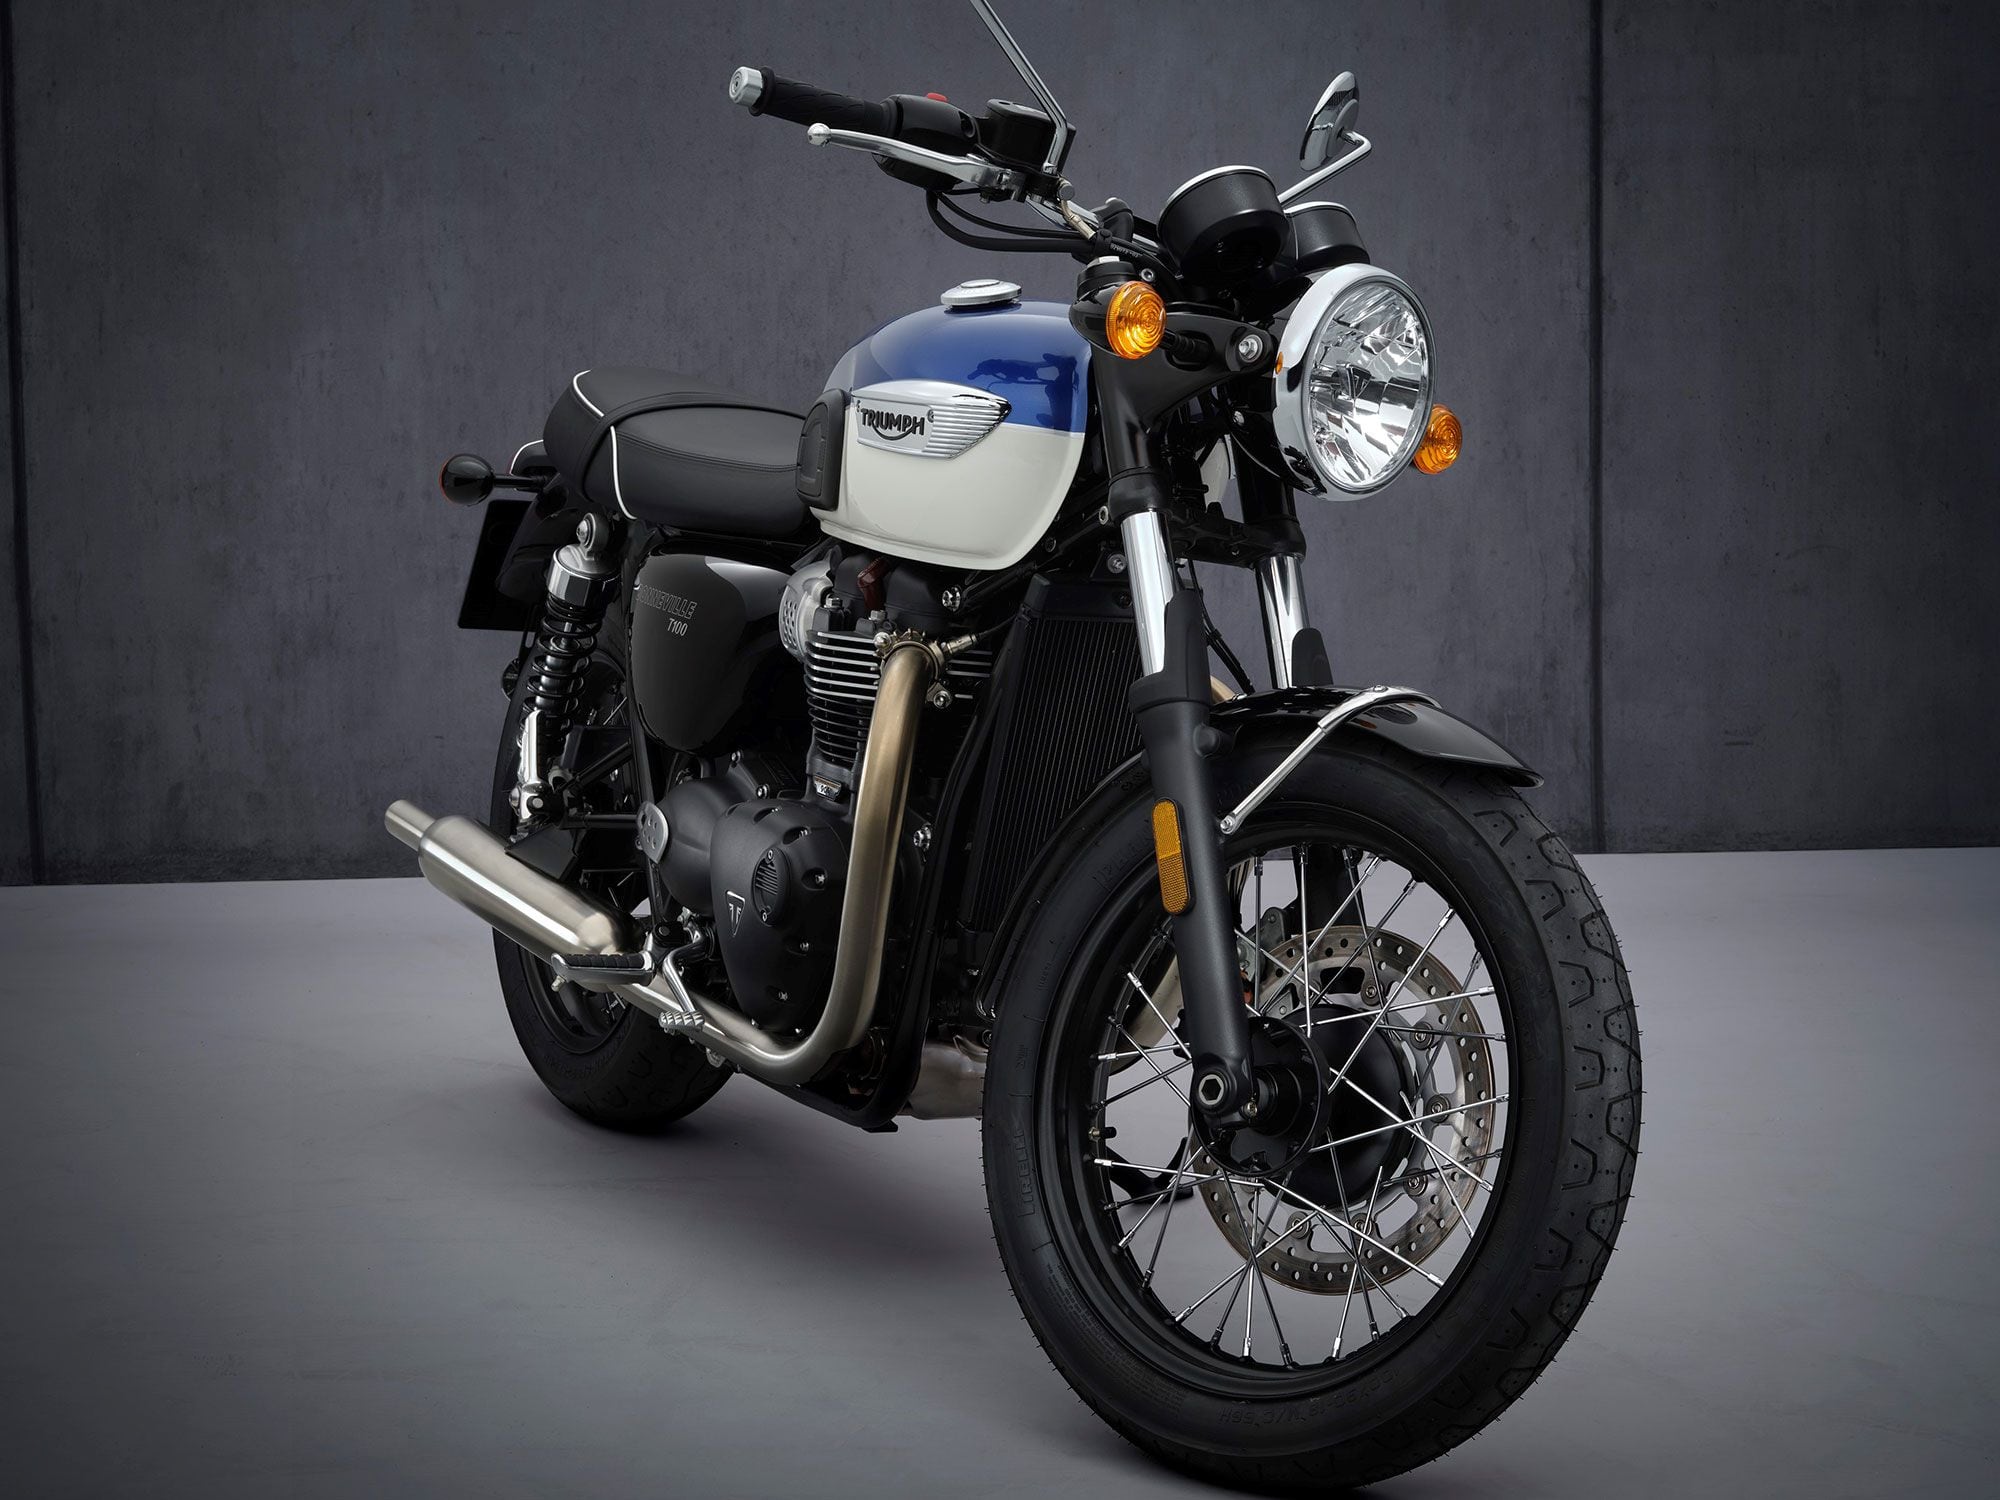 The 2022 T100 still rolls with the 900cc HT engine, but it gains 10 hp. It also adds a new cartridge fork and upgraded brake calipers.